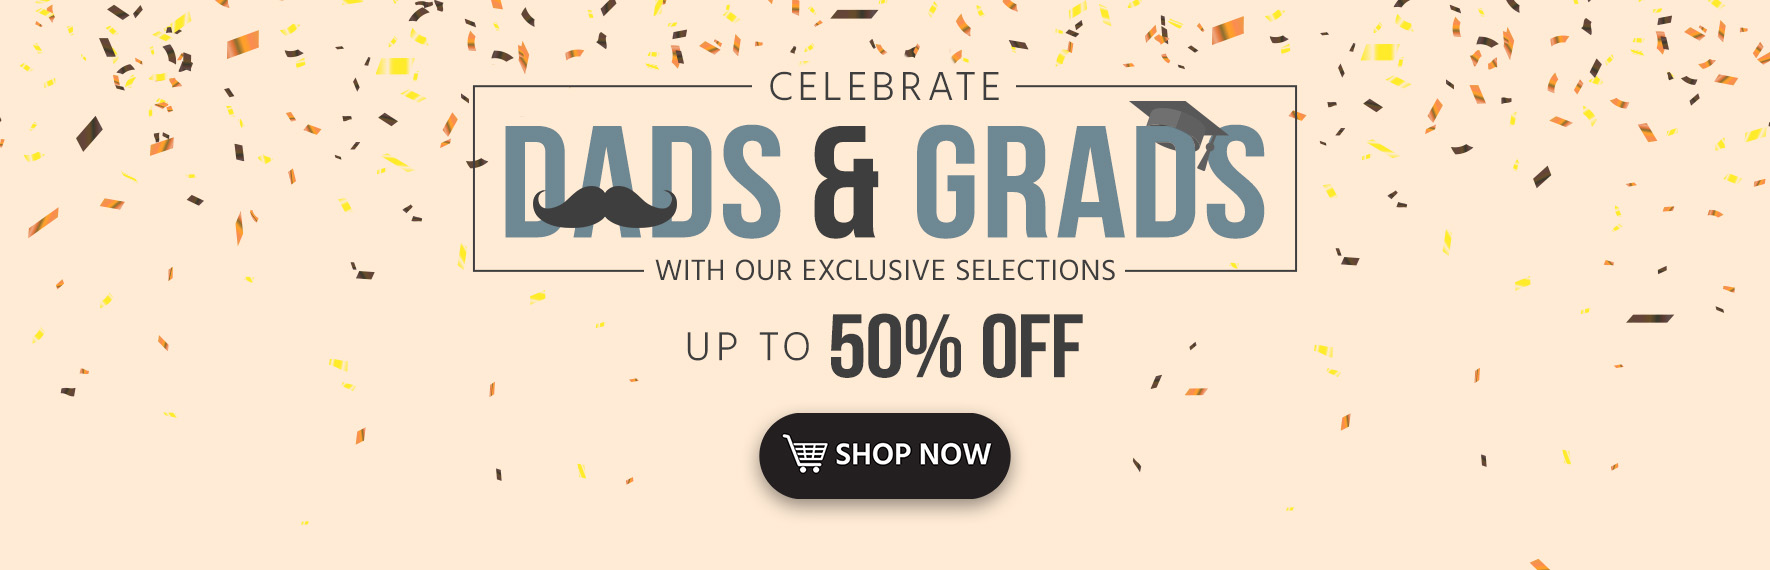 Celebrate Dads and Grads! Up to 50% off With our Exclusive Selections Shop Now